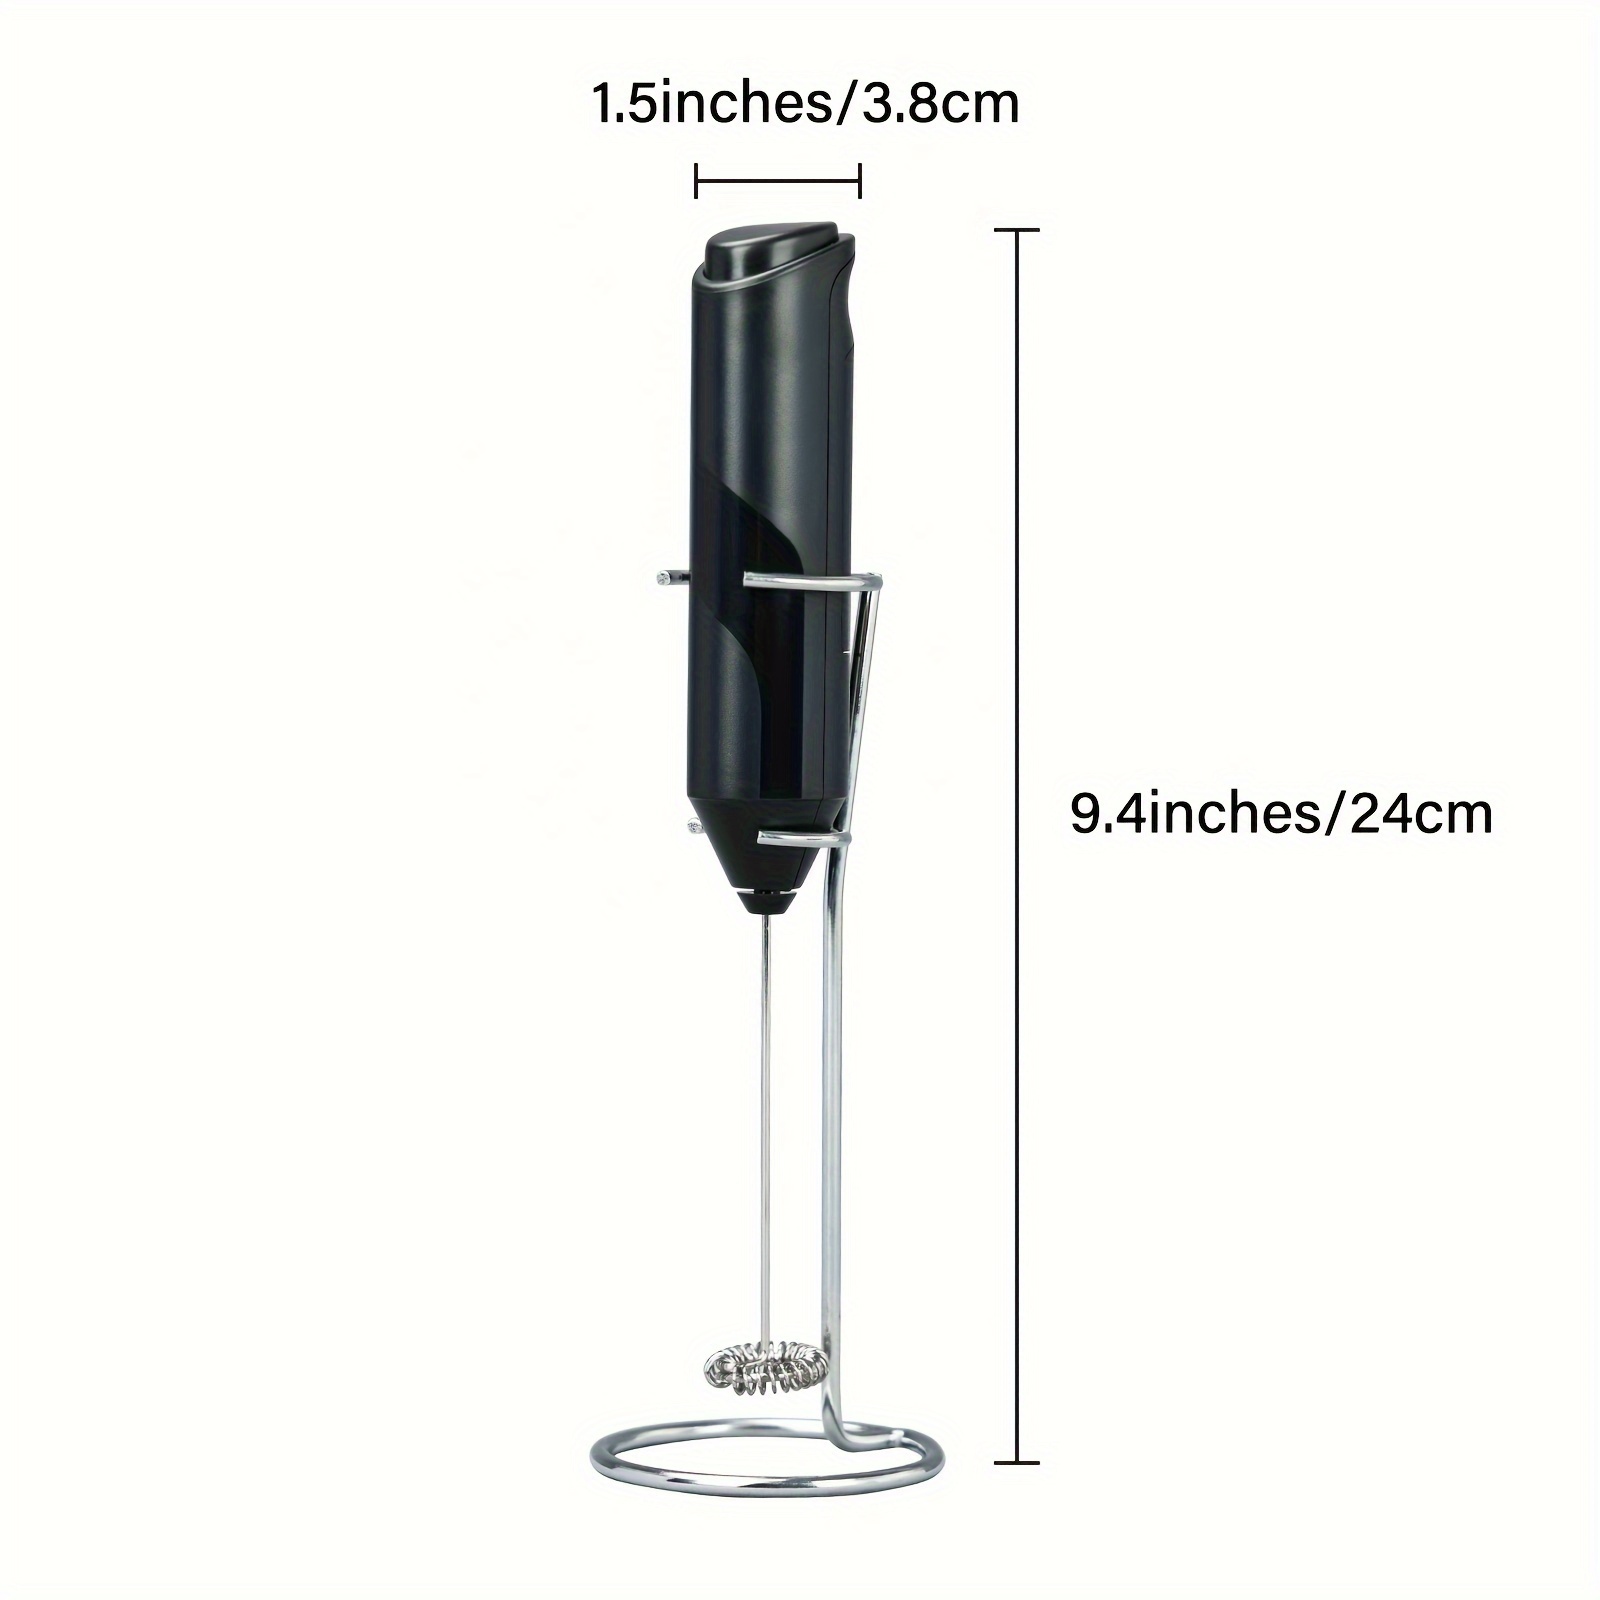 COKUNST Electric Milk Frother Handheld with Stainless Steel Stand Battery Powered Foam Maker, Whisk Drink Mixer Mini Blender for Coffee, Frappe, Latte